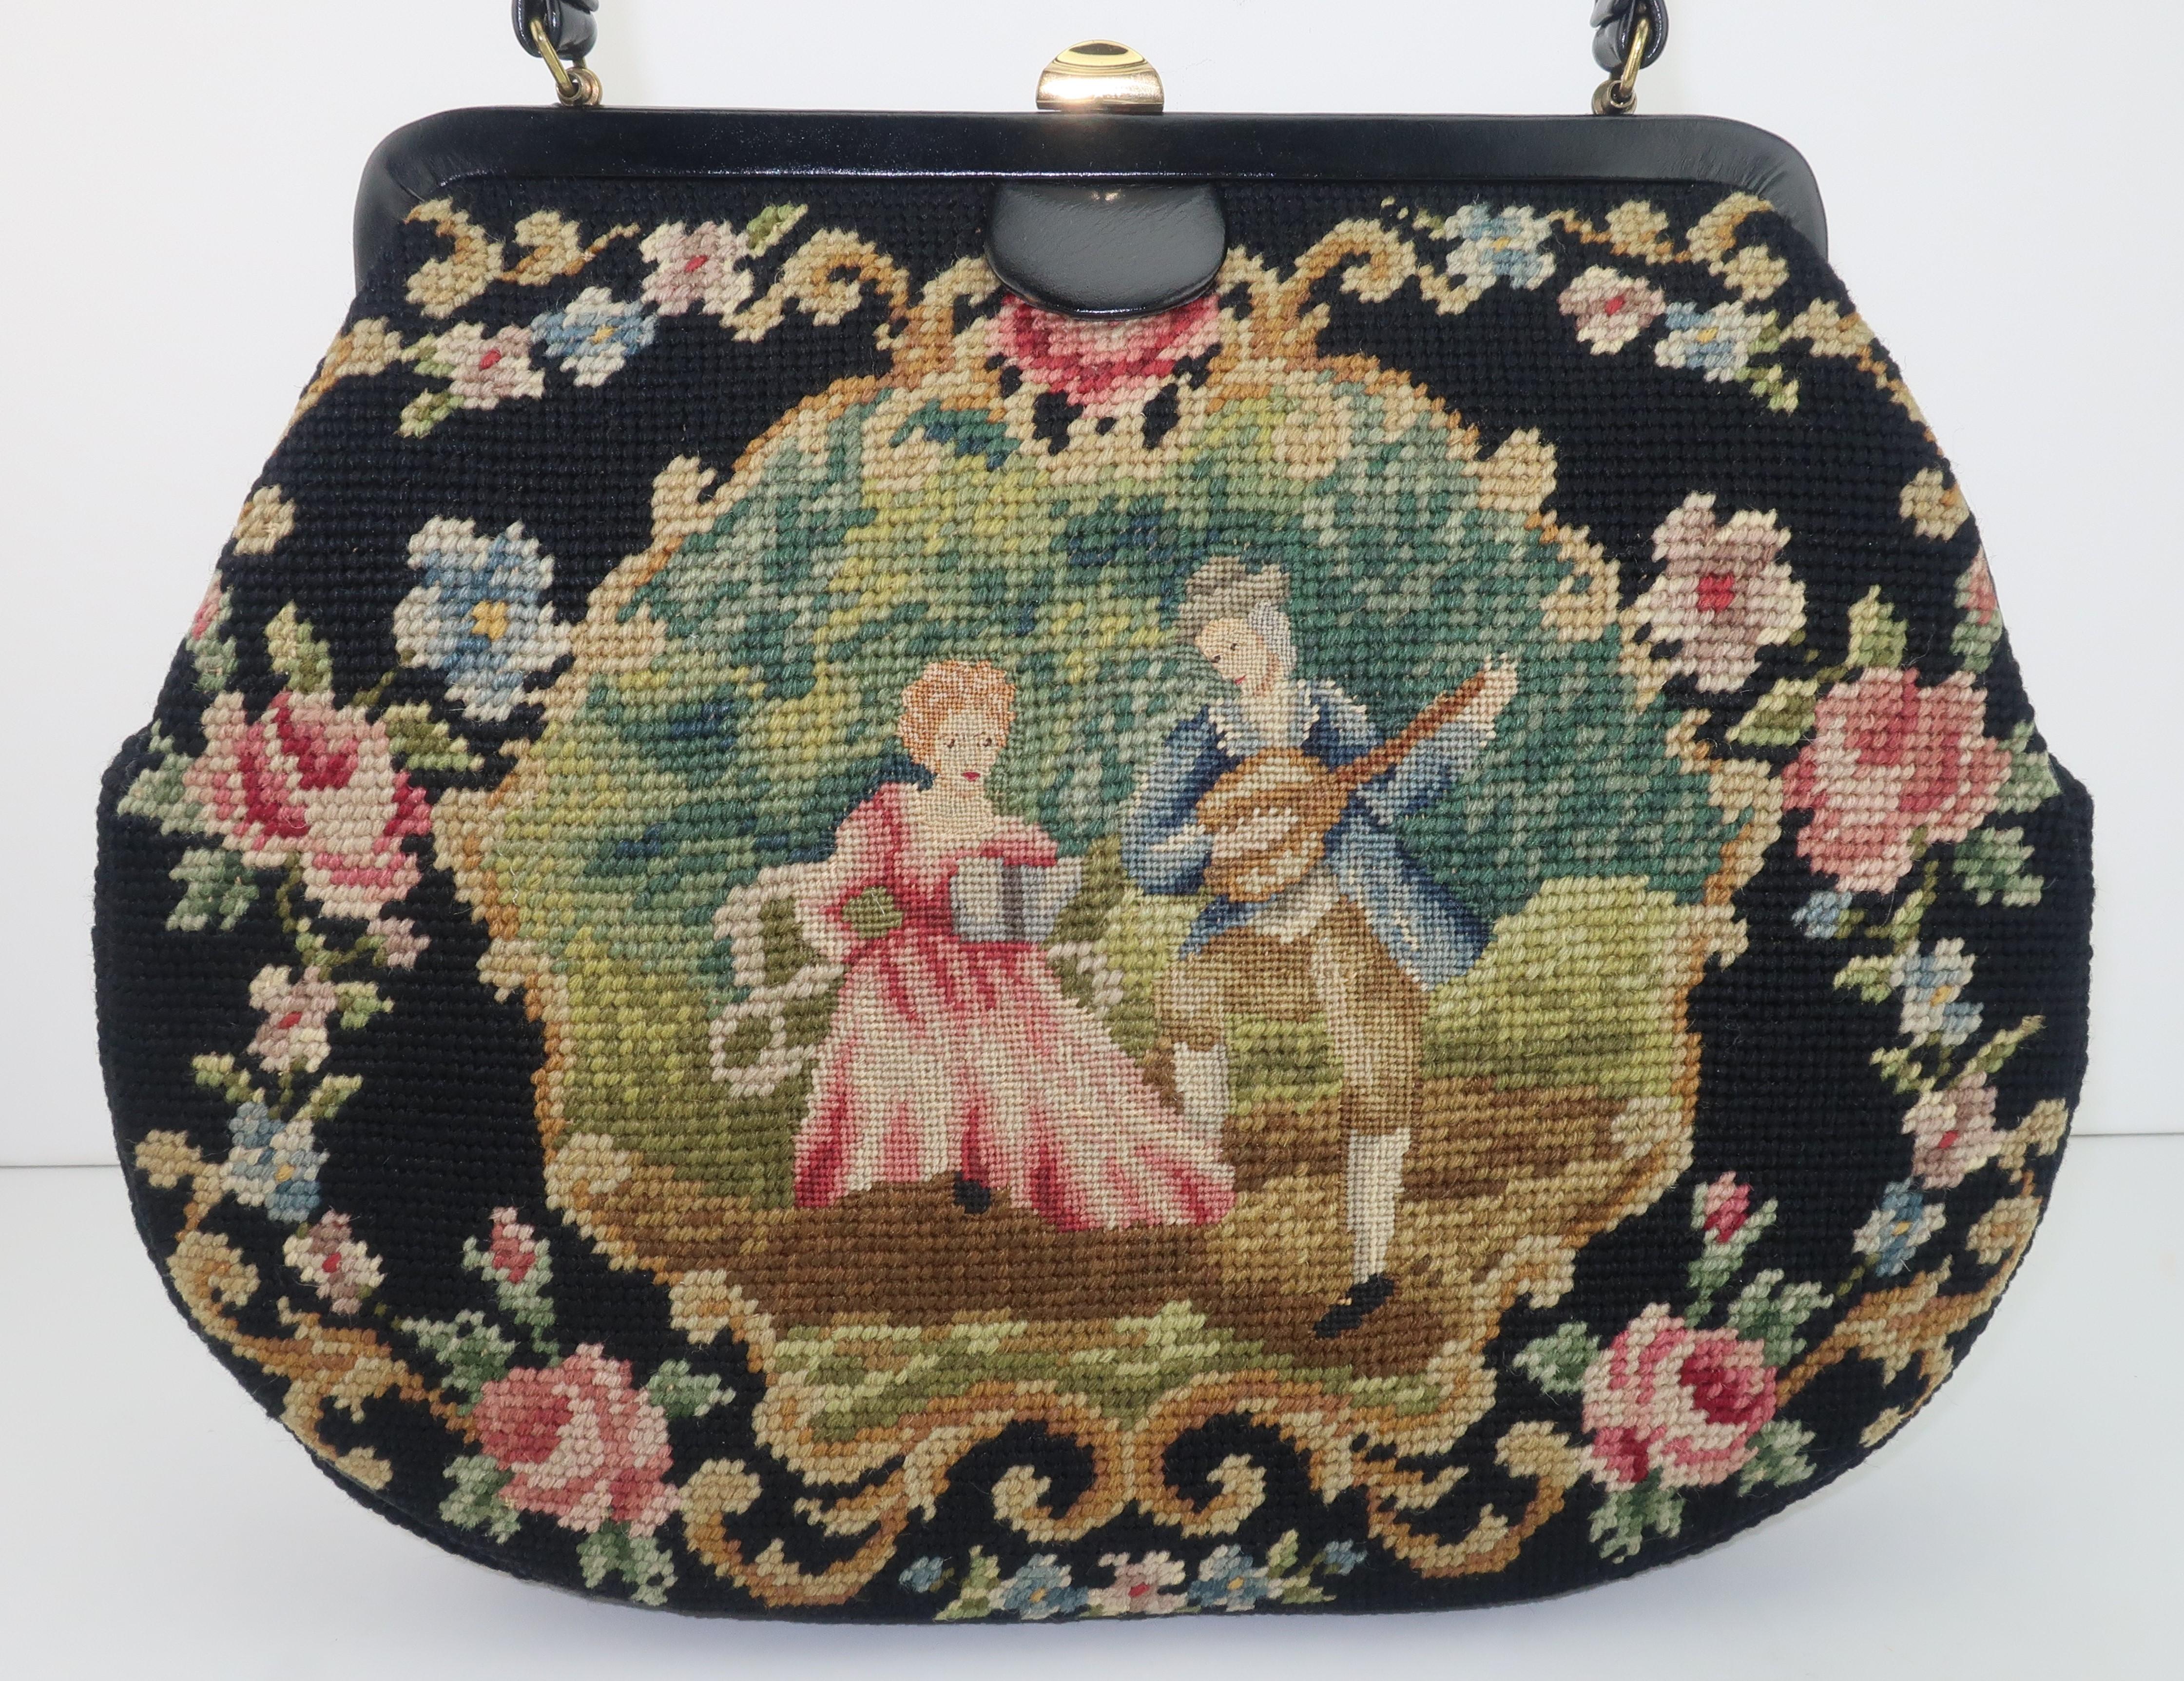 Not all 'granny bags' are created equal!  This 1950's needlepoint example is at the front of the pack with a black leather frame accented by a country French scene depicting a petit point couple on one side and a floral pattern on the other in